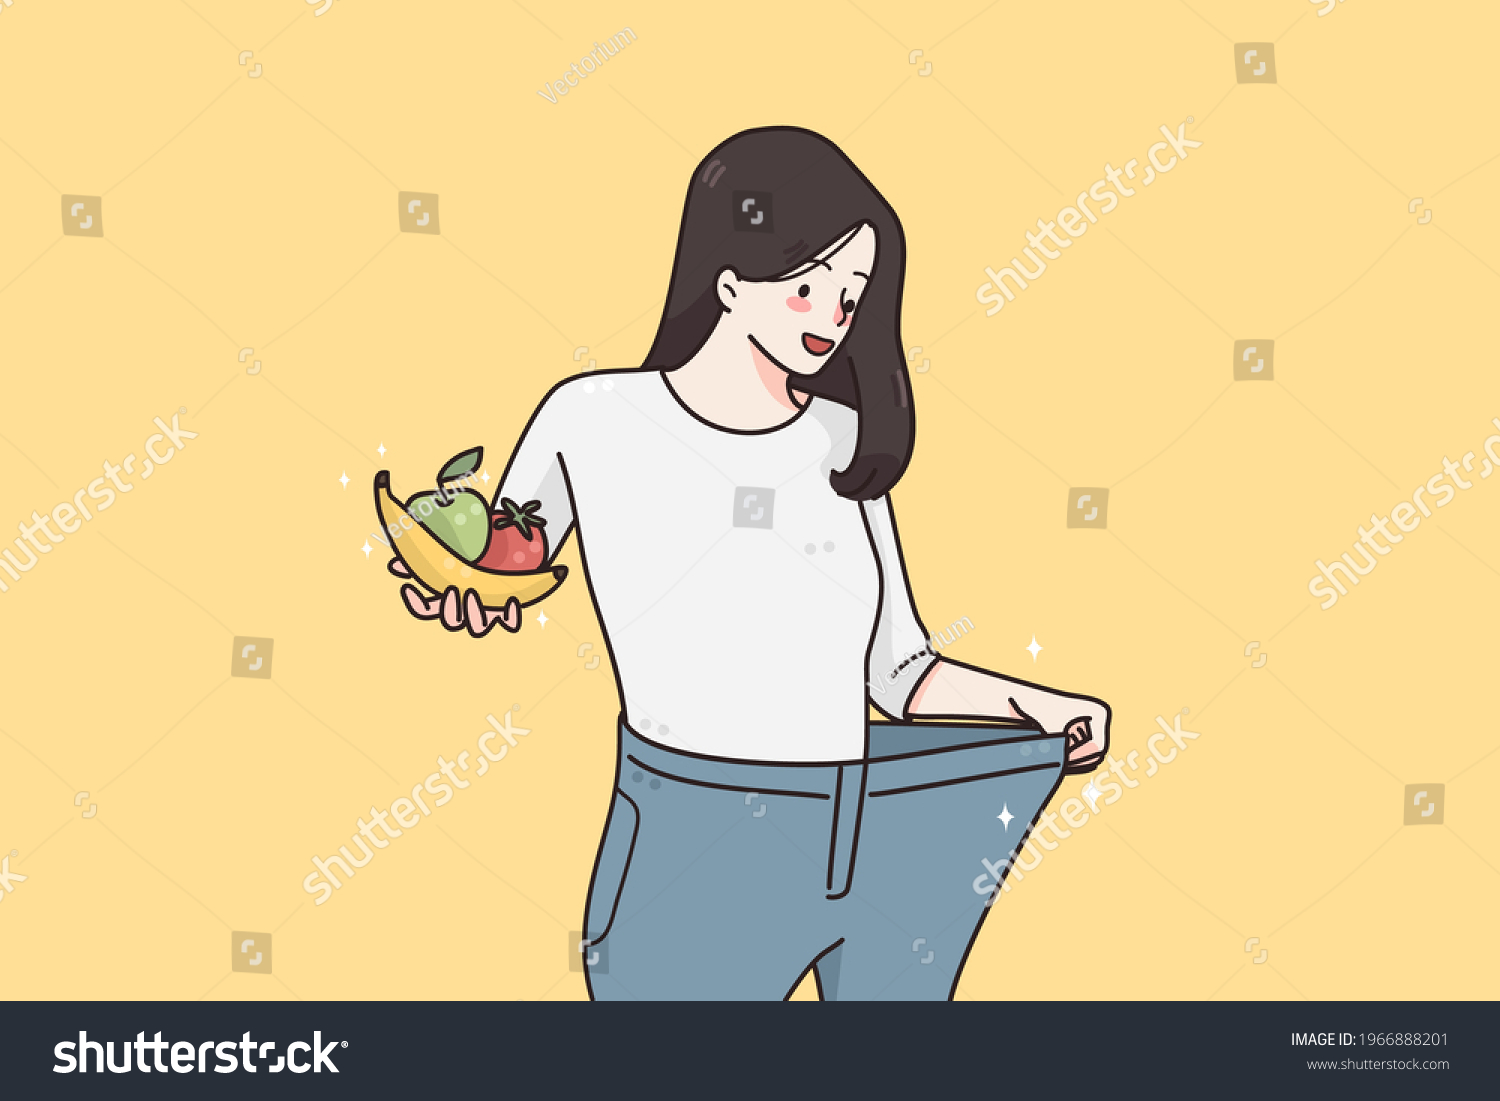 Weight loss and diet concept. Happy smiling woman in oversized jeans standing holding fresh fruits and vegetables showing weight loss results vector illustration  #1966888201